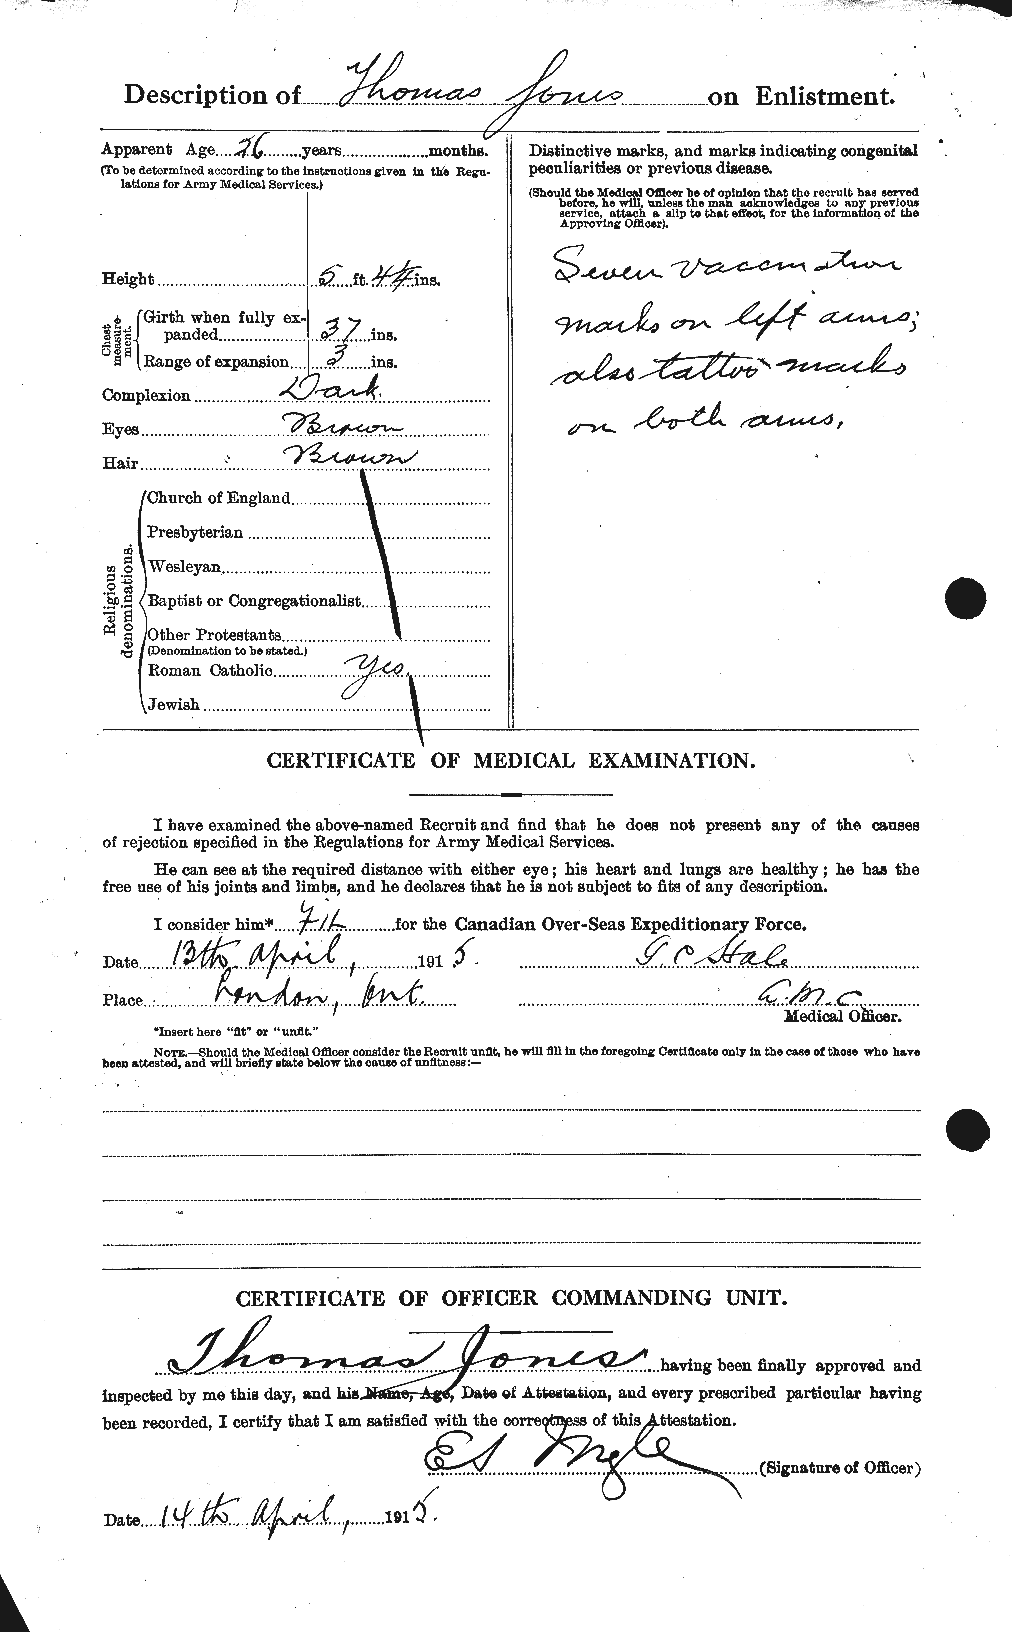 Personnel Records of the First World War - CEF 426597b